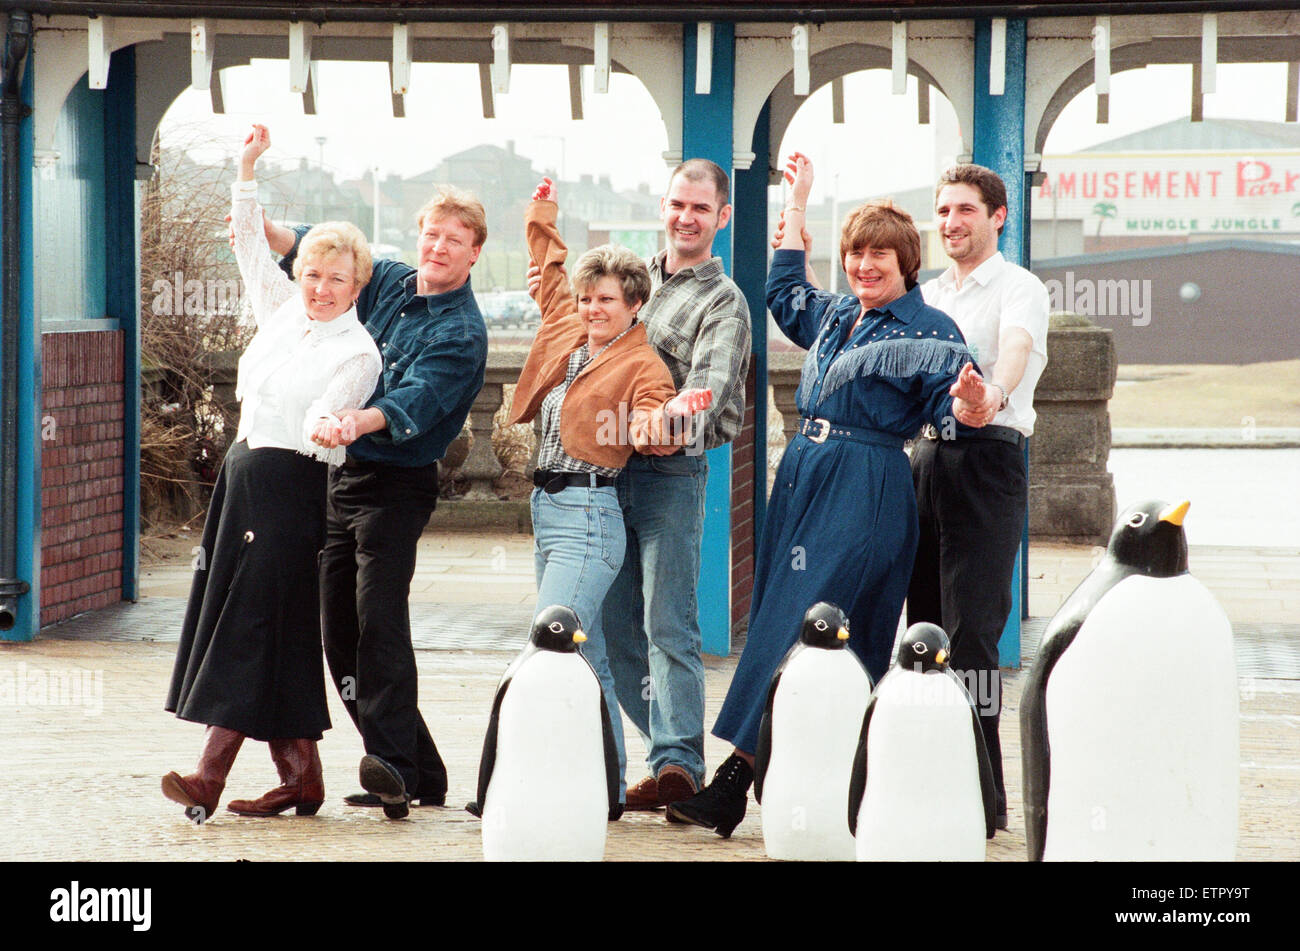 Redcarl Bowl is hosting a big line dancing event at the weekend, and is launching weekly line dance nights. Getting some practise at Redcar are Kevin Paul, Simon McCluskey, Michael Williams, Sue JAckson, Rosemary Barker and Joan Martin. 6th March 1996. Stock Photo